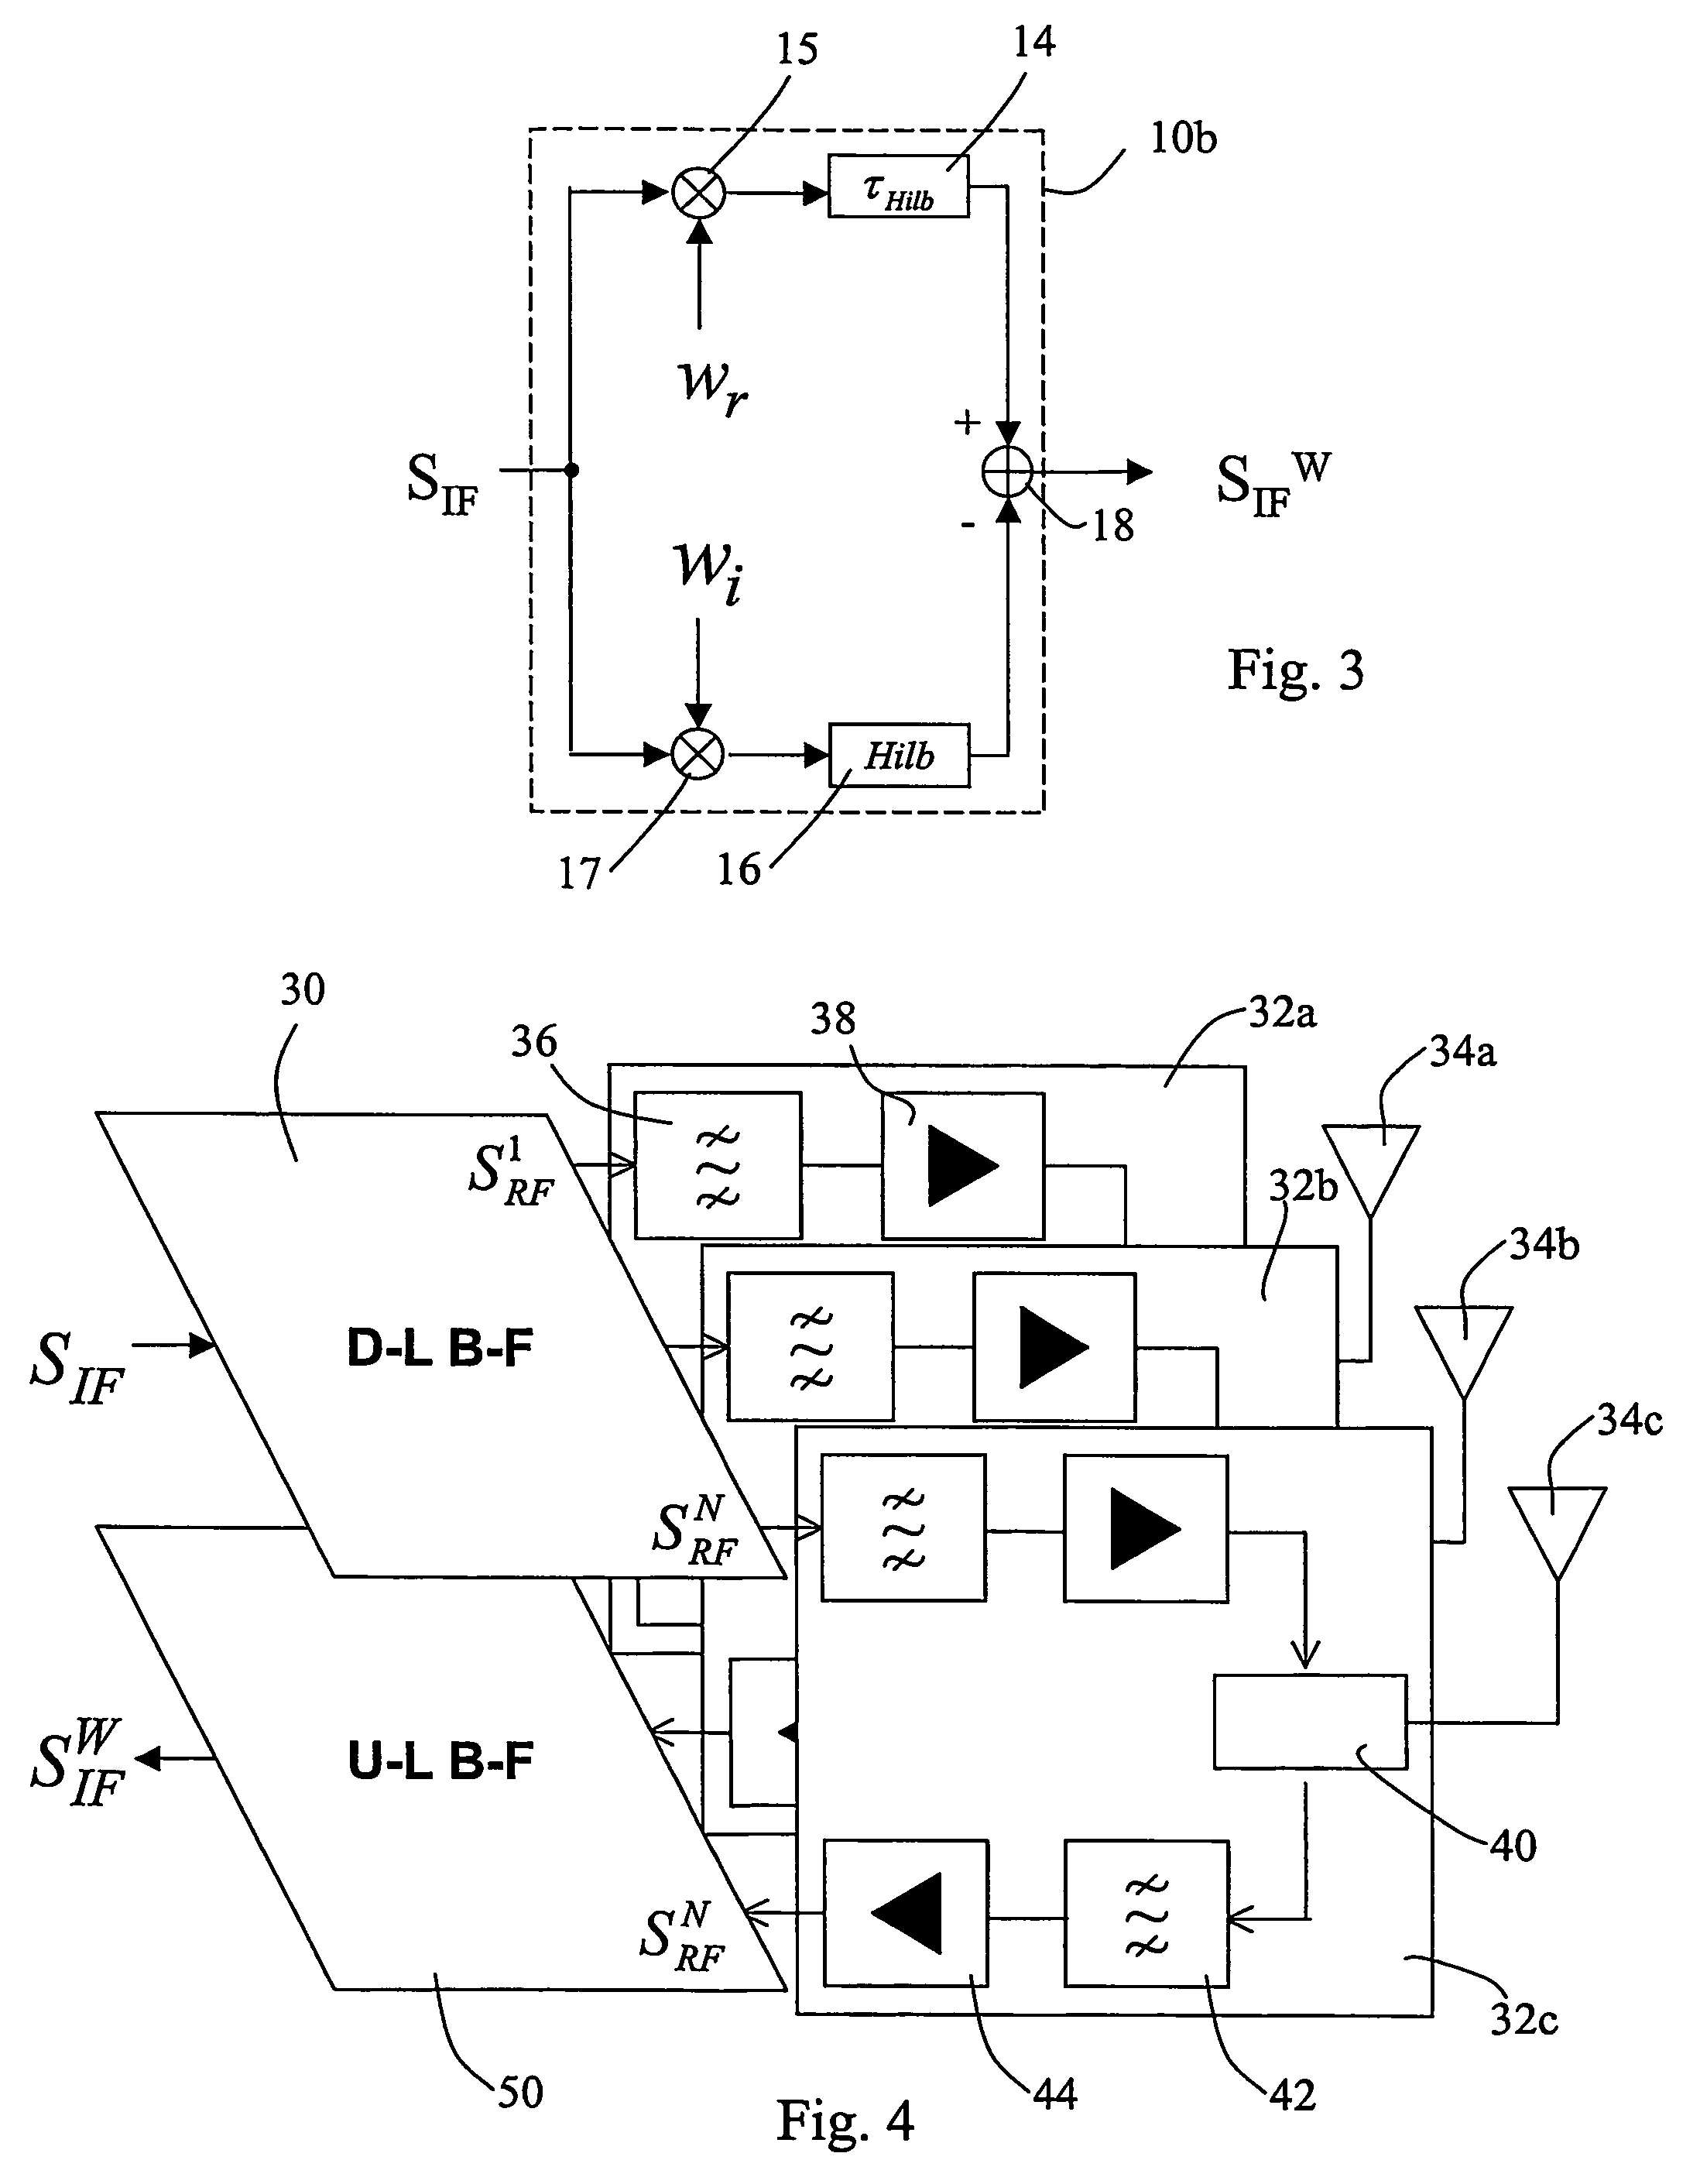 Method and system for performing digital beam forming at intermediate frequency on the radiation pattern of an array antenna